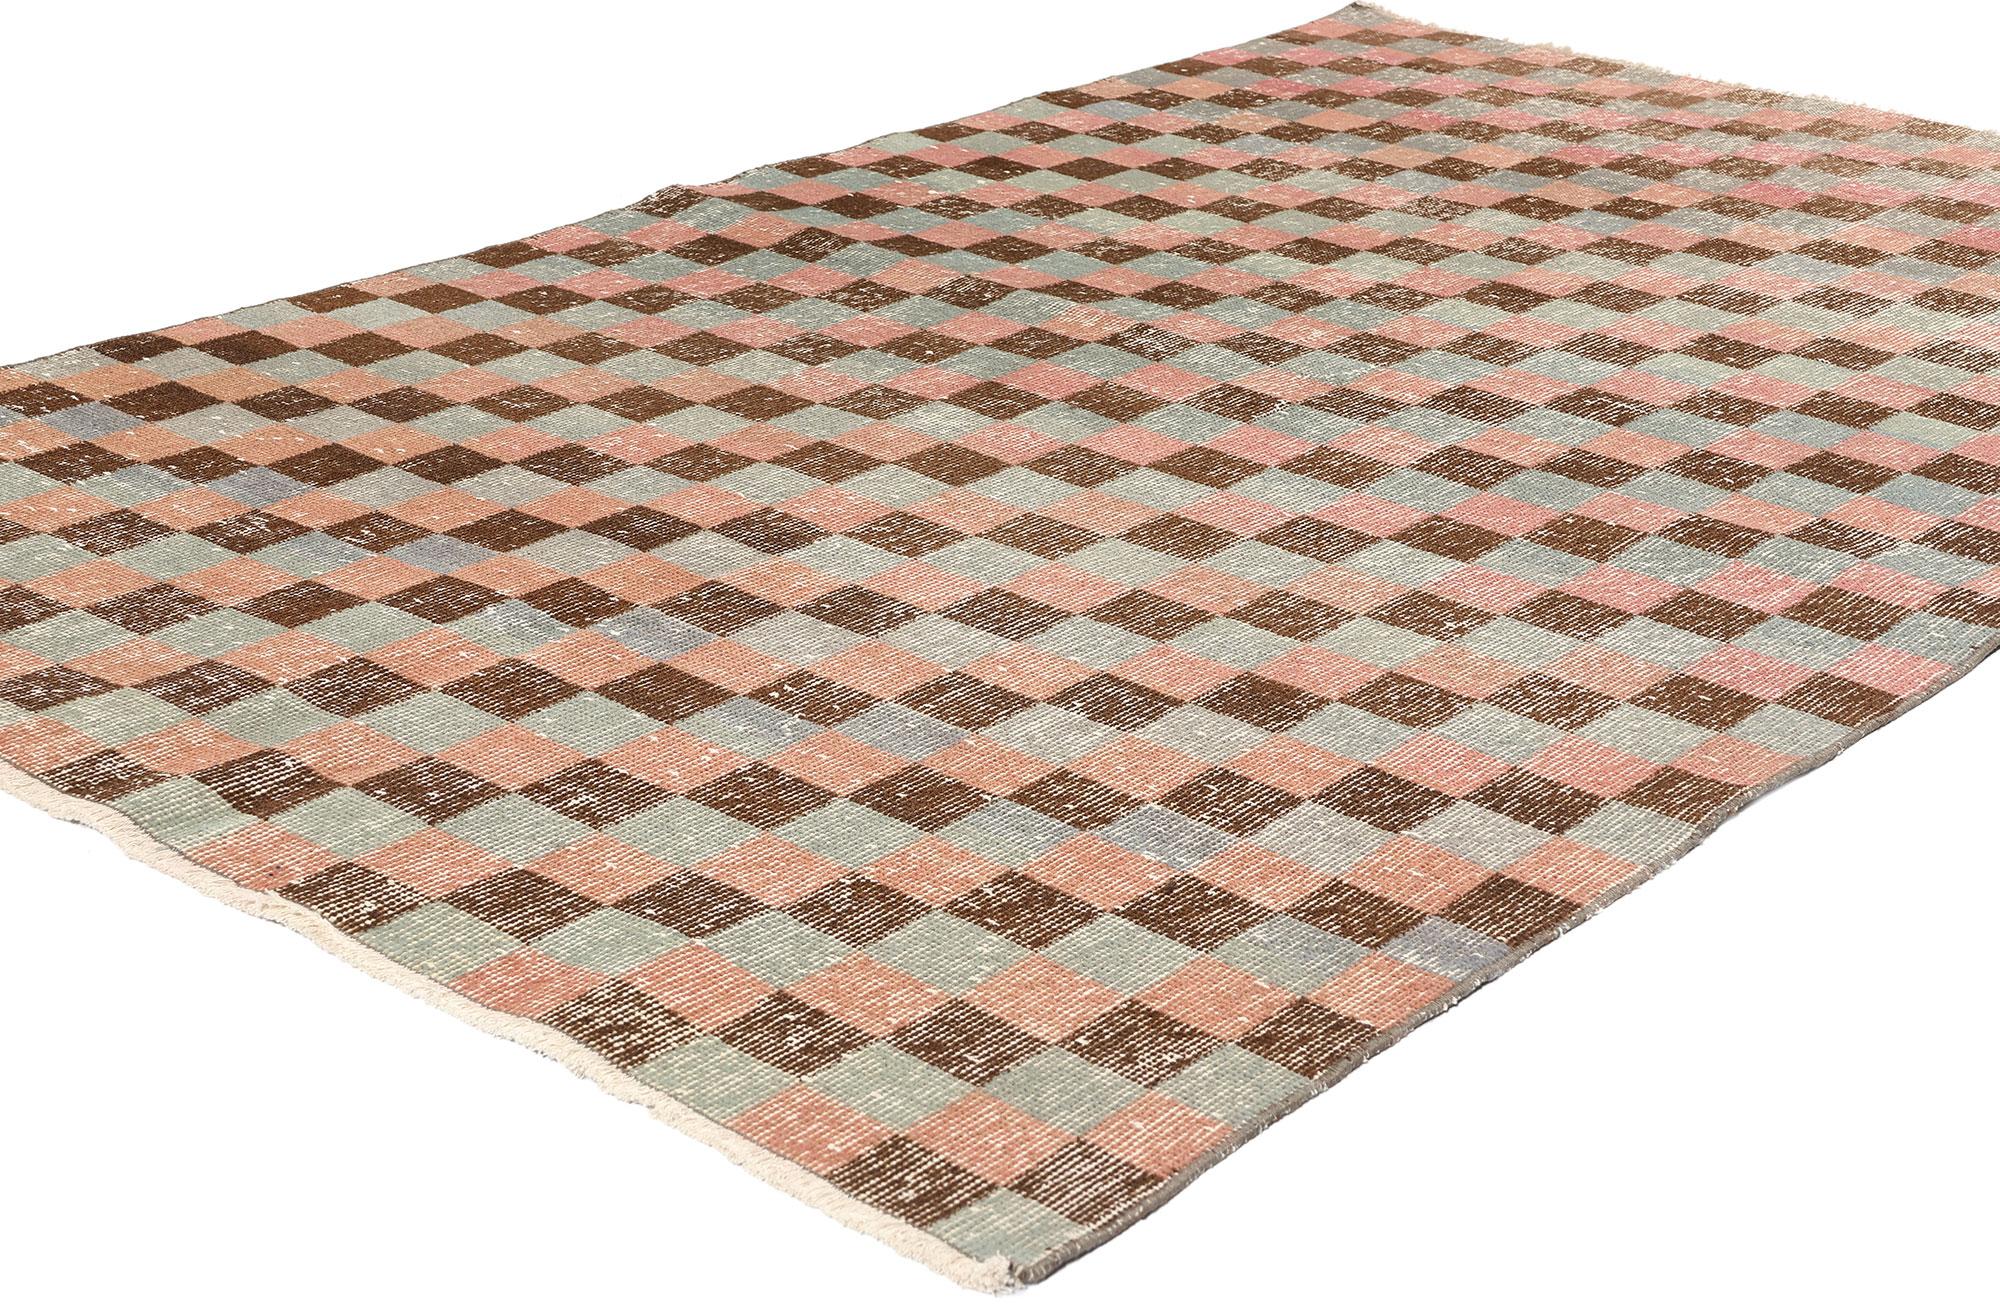 53275 Zeki Muren Distressed Vintage Turkish Sivas Rug, 04'02 x 06'08. Nestled within the serene landscapes of Turkey's Sivas region, Zeki Muren Turkish Sivas rugs honor the legacy of the inspiring Turkish singer. Renowned for their impeccable